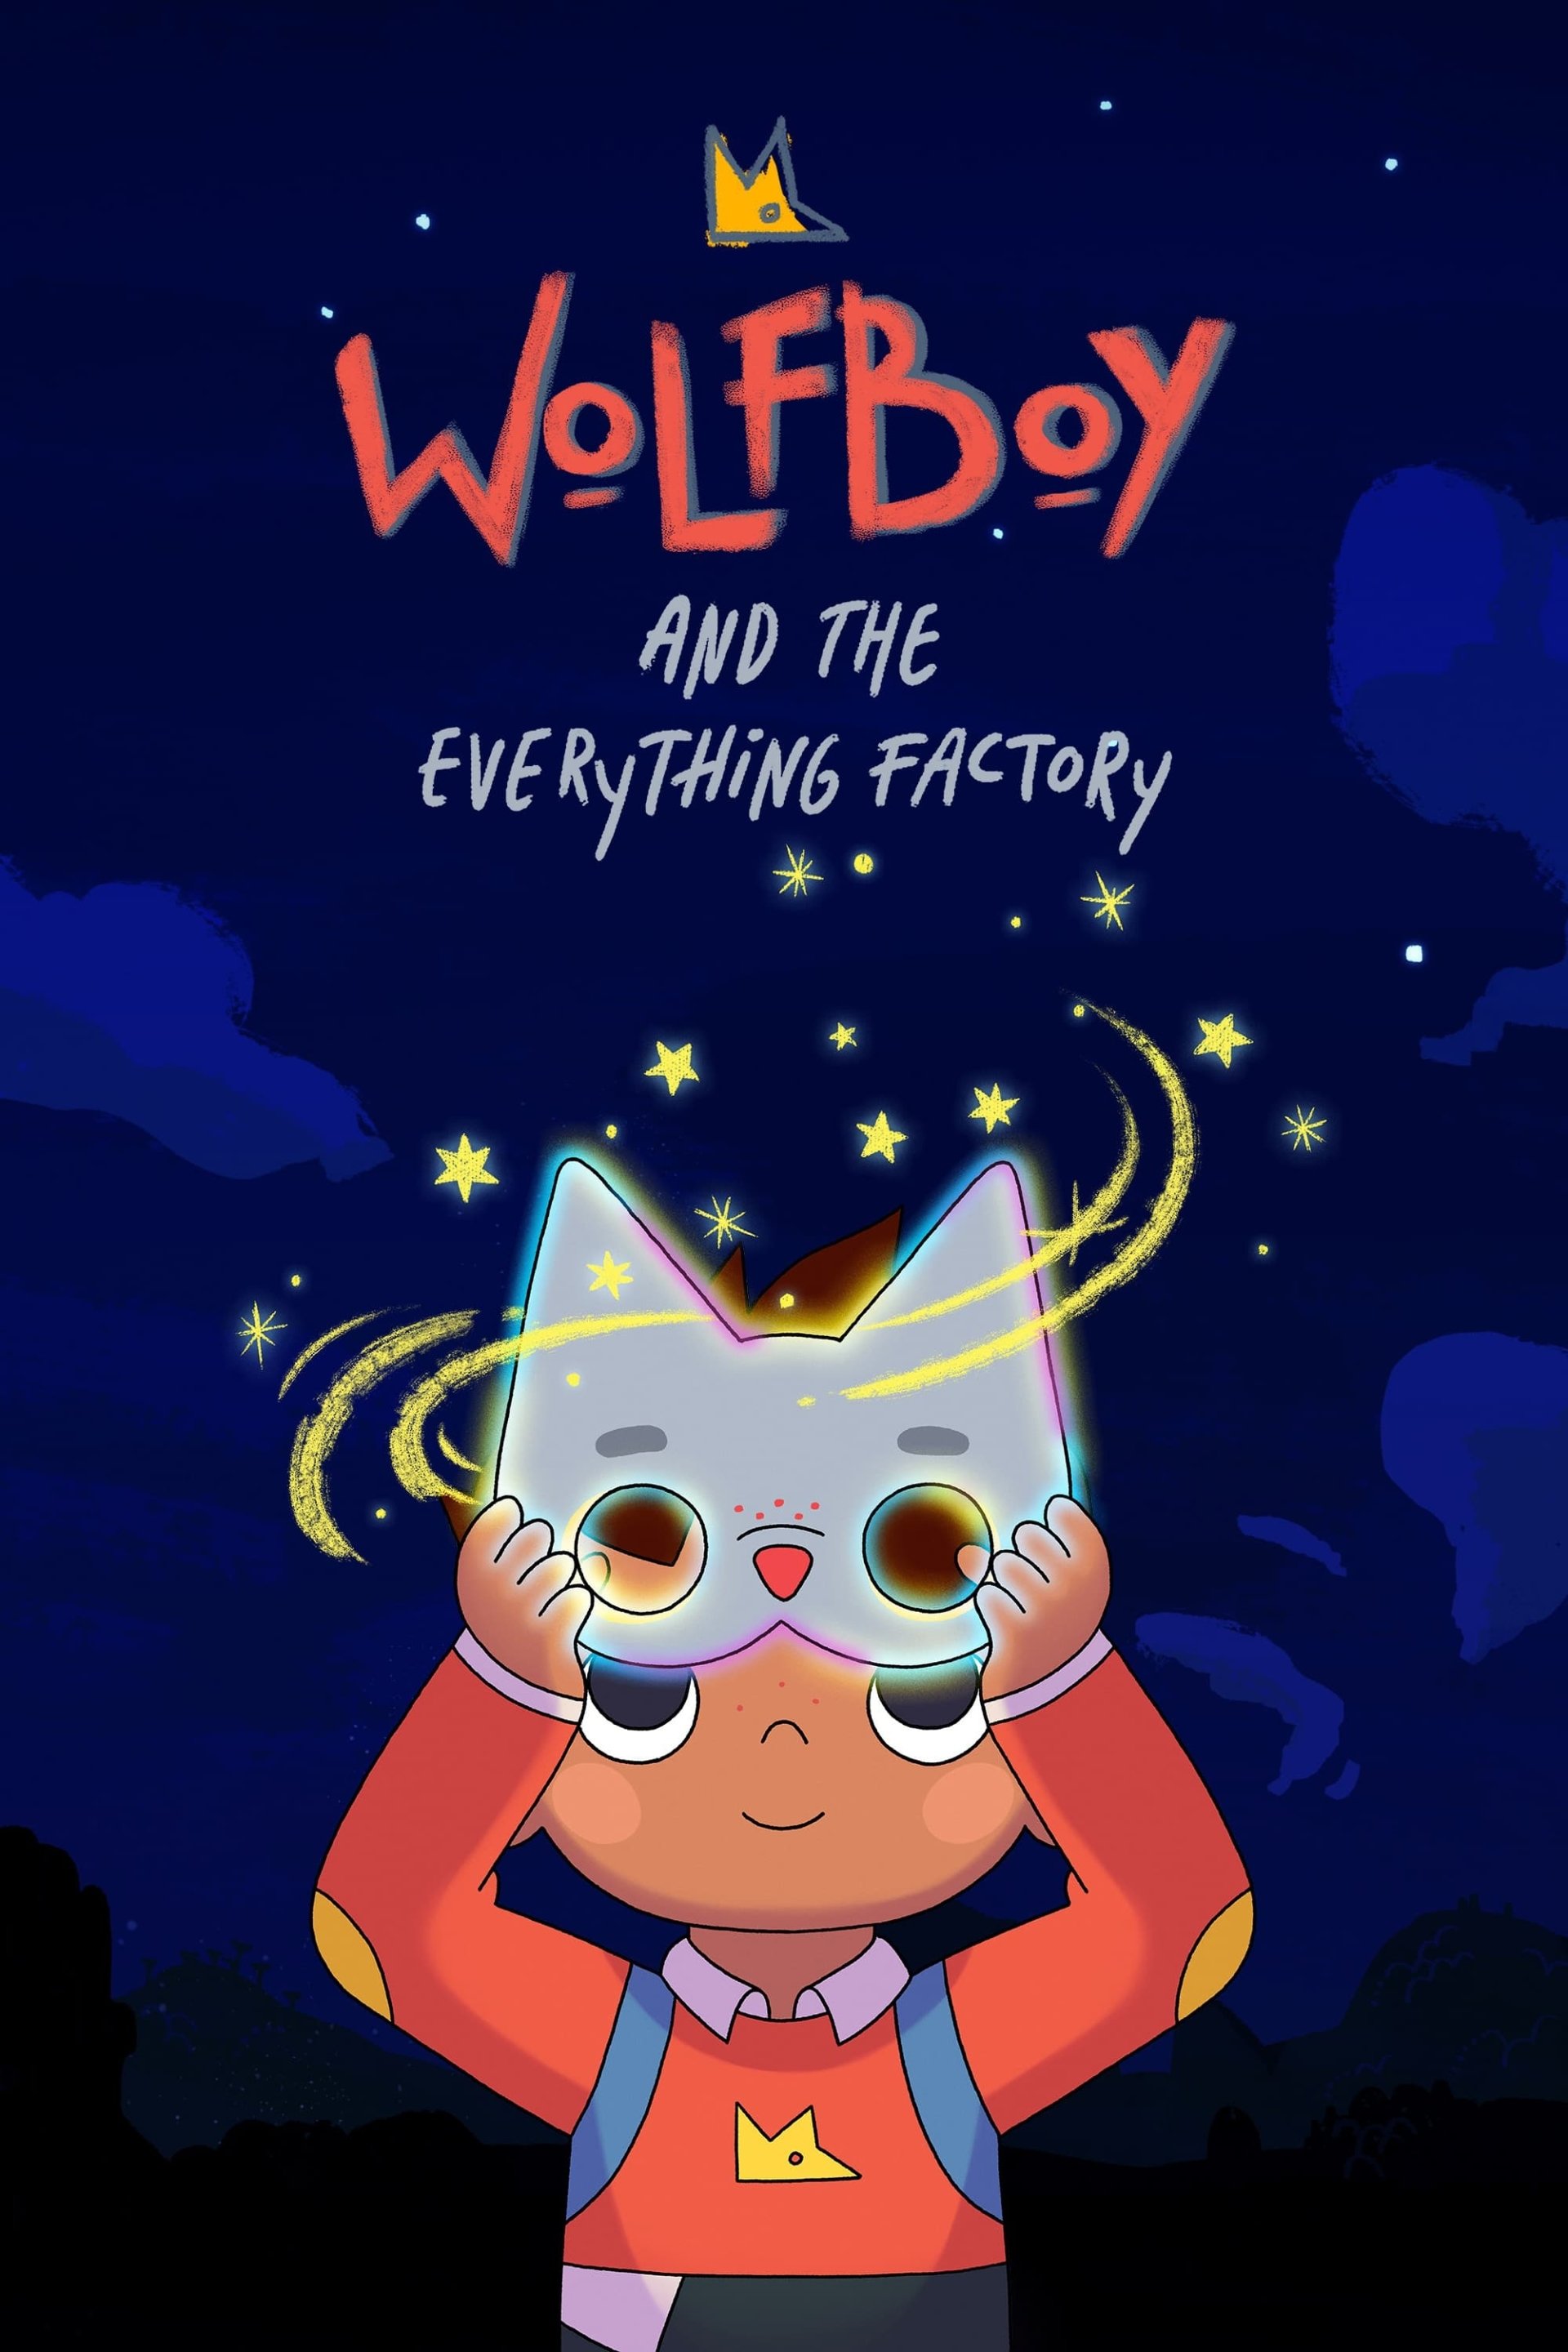 Wolfboy and The Everything Factory Season 2 Episode 3